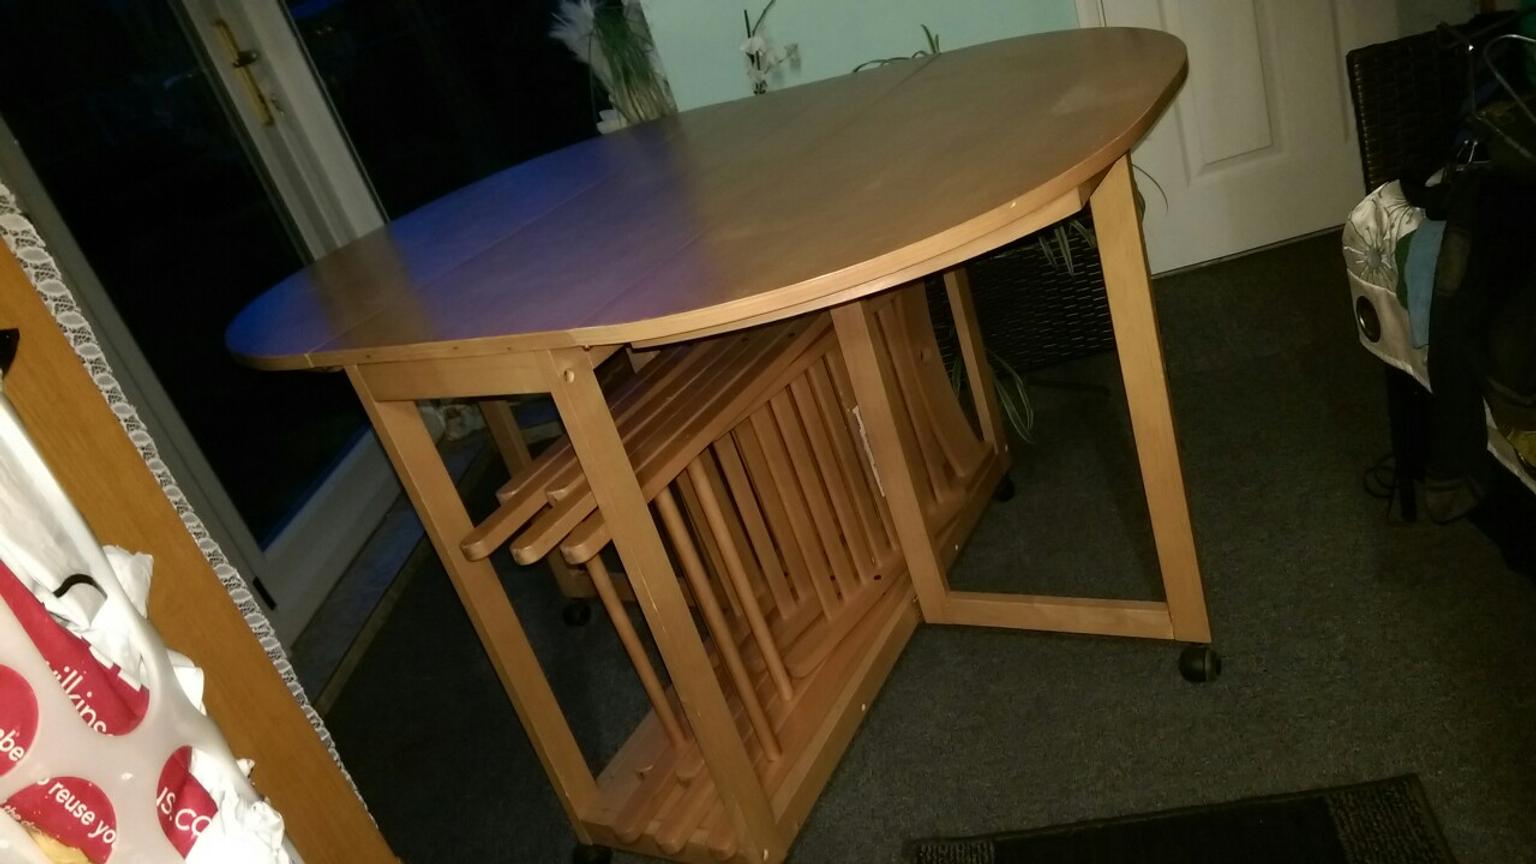 Folding Oval Table And Chairs Ikea In Sg6 Letchworth For 30 00 For Sale Shpock